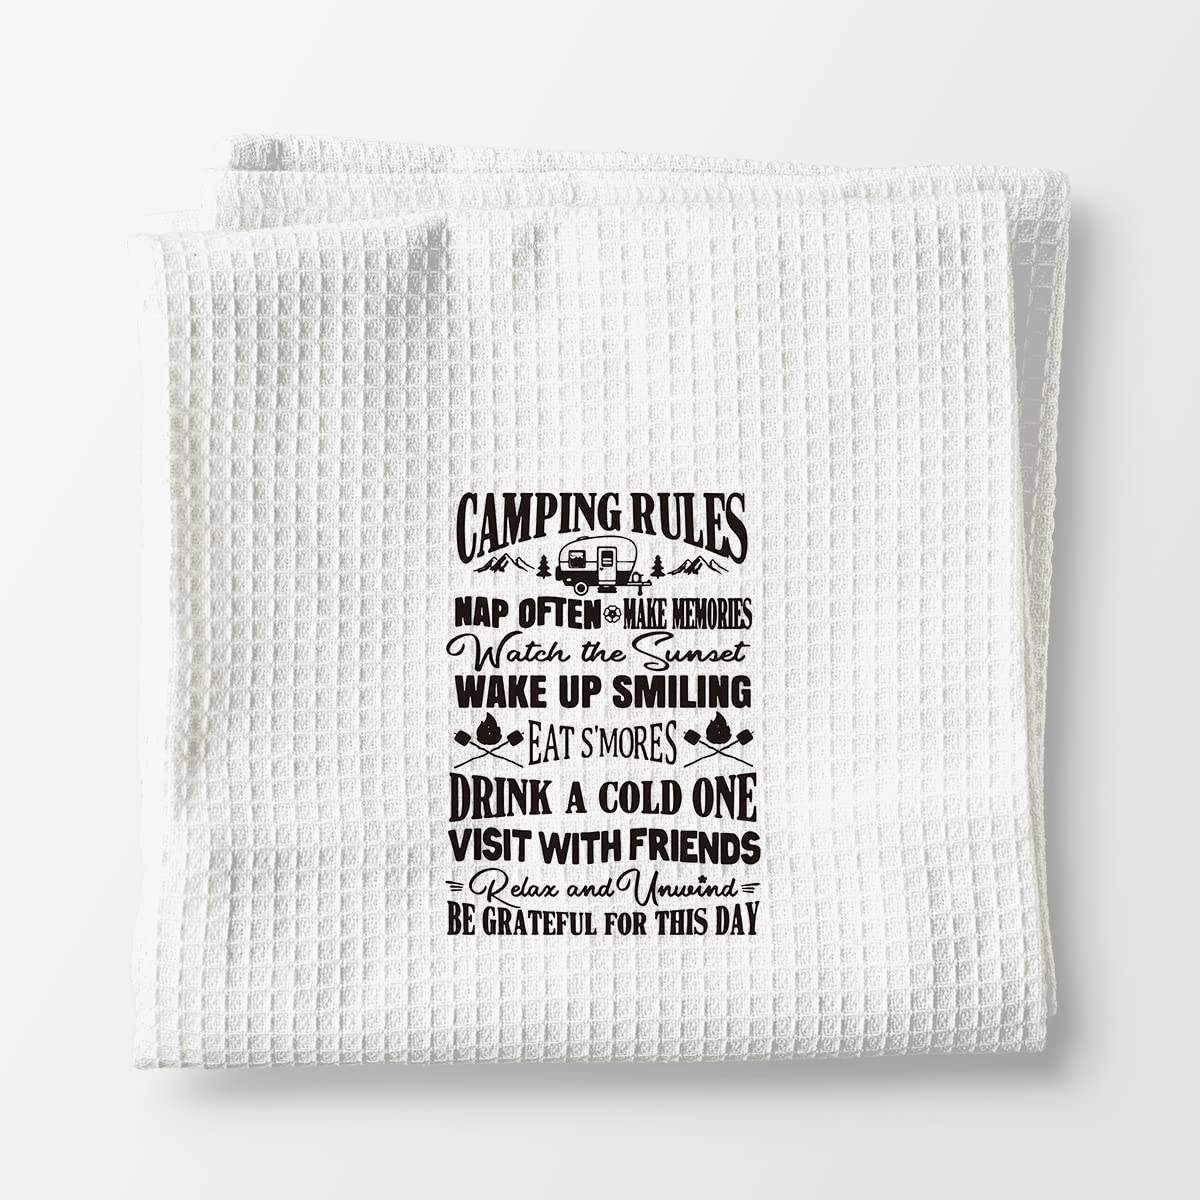 Camping Rules Camping Themed Kitchen Towels Dish Towels Hand Towels,Camping Kitchen Towels Dishcloths For Campers RV Trailer,Camping Gifts For Women Men Kids Camper Dad Her Him,Camping Lovers Gifts